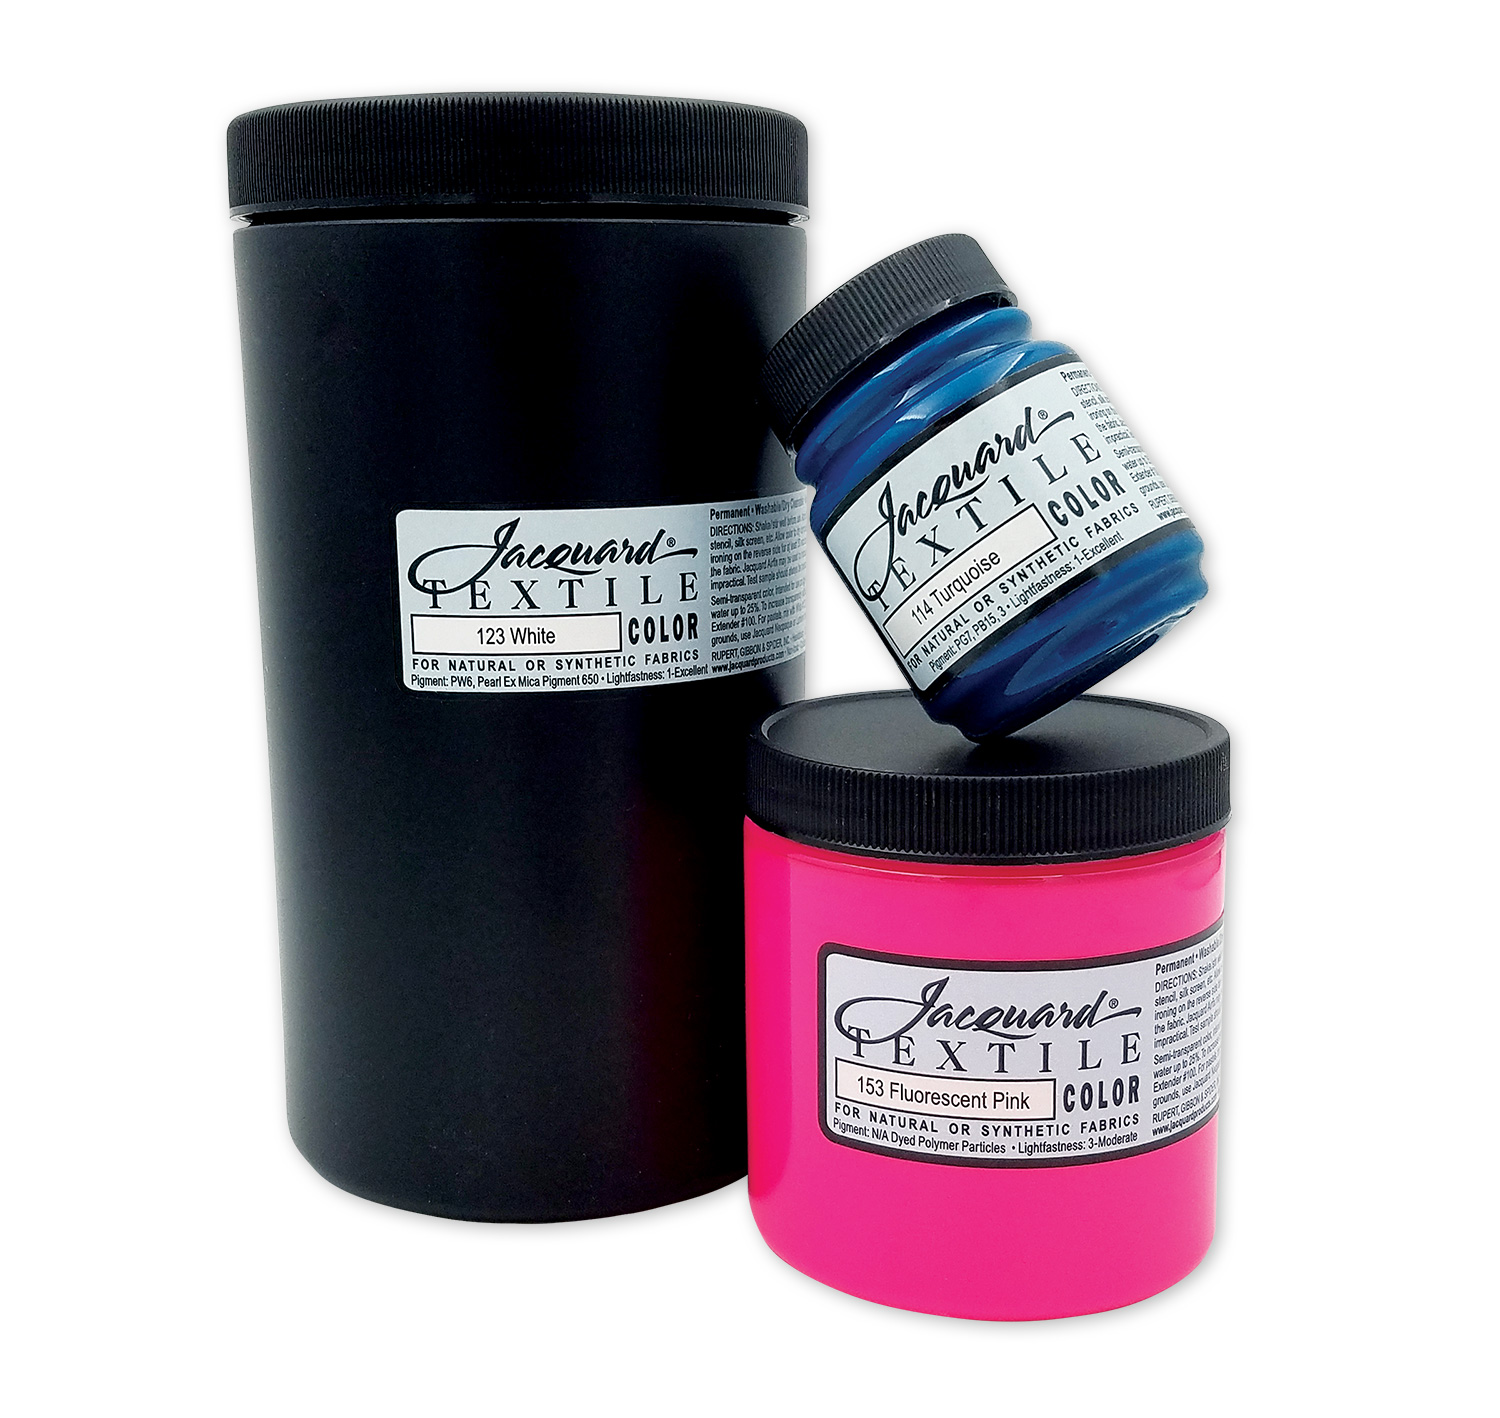 Jacquard Fabric Paint for Clothes - 8 Oz Textile Color - Black - Leaves  Fabric Soft - Permanent and Colorfast - Professional Quality Paints Made in